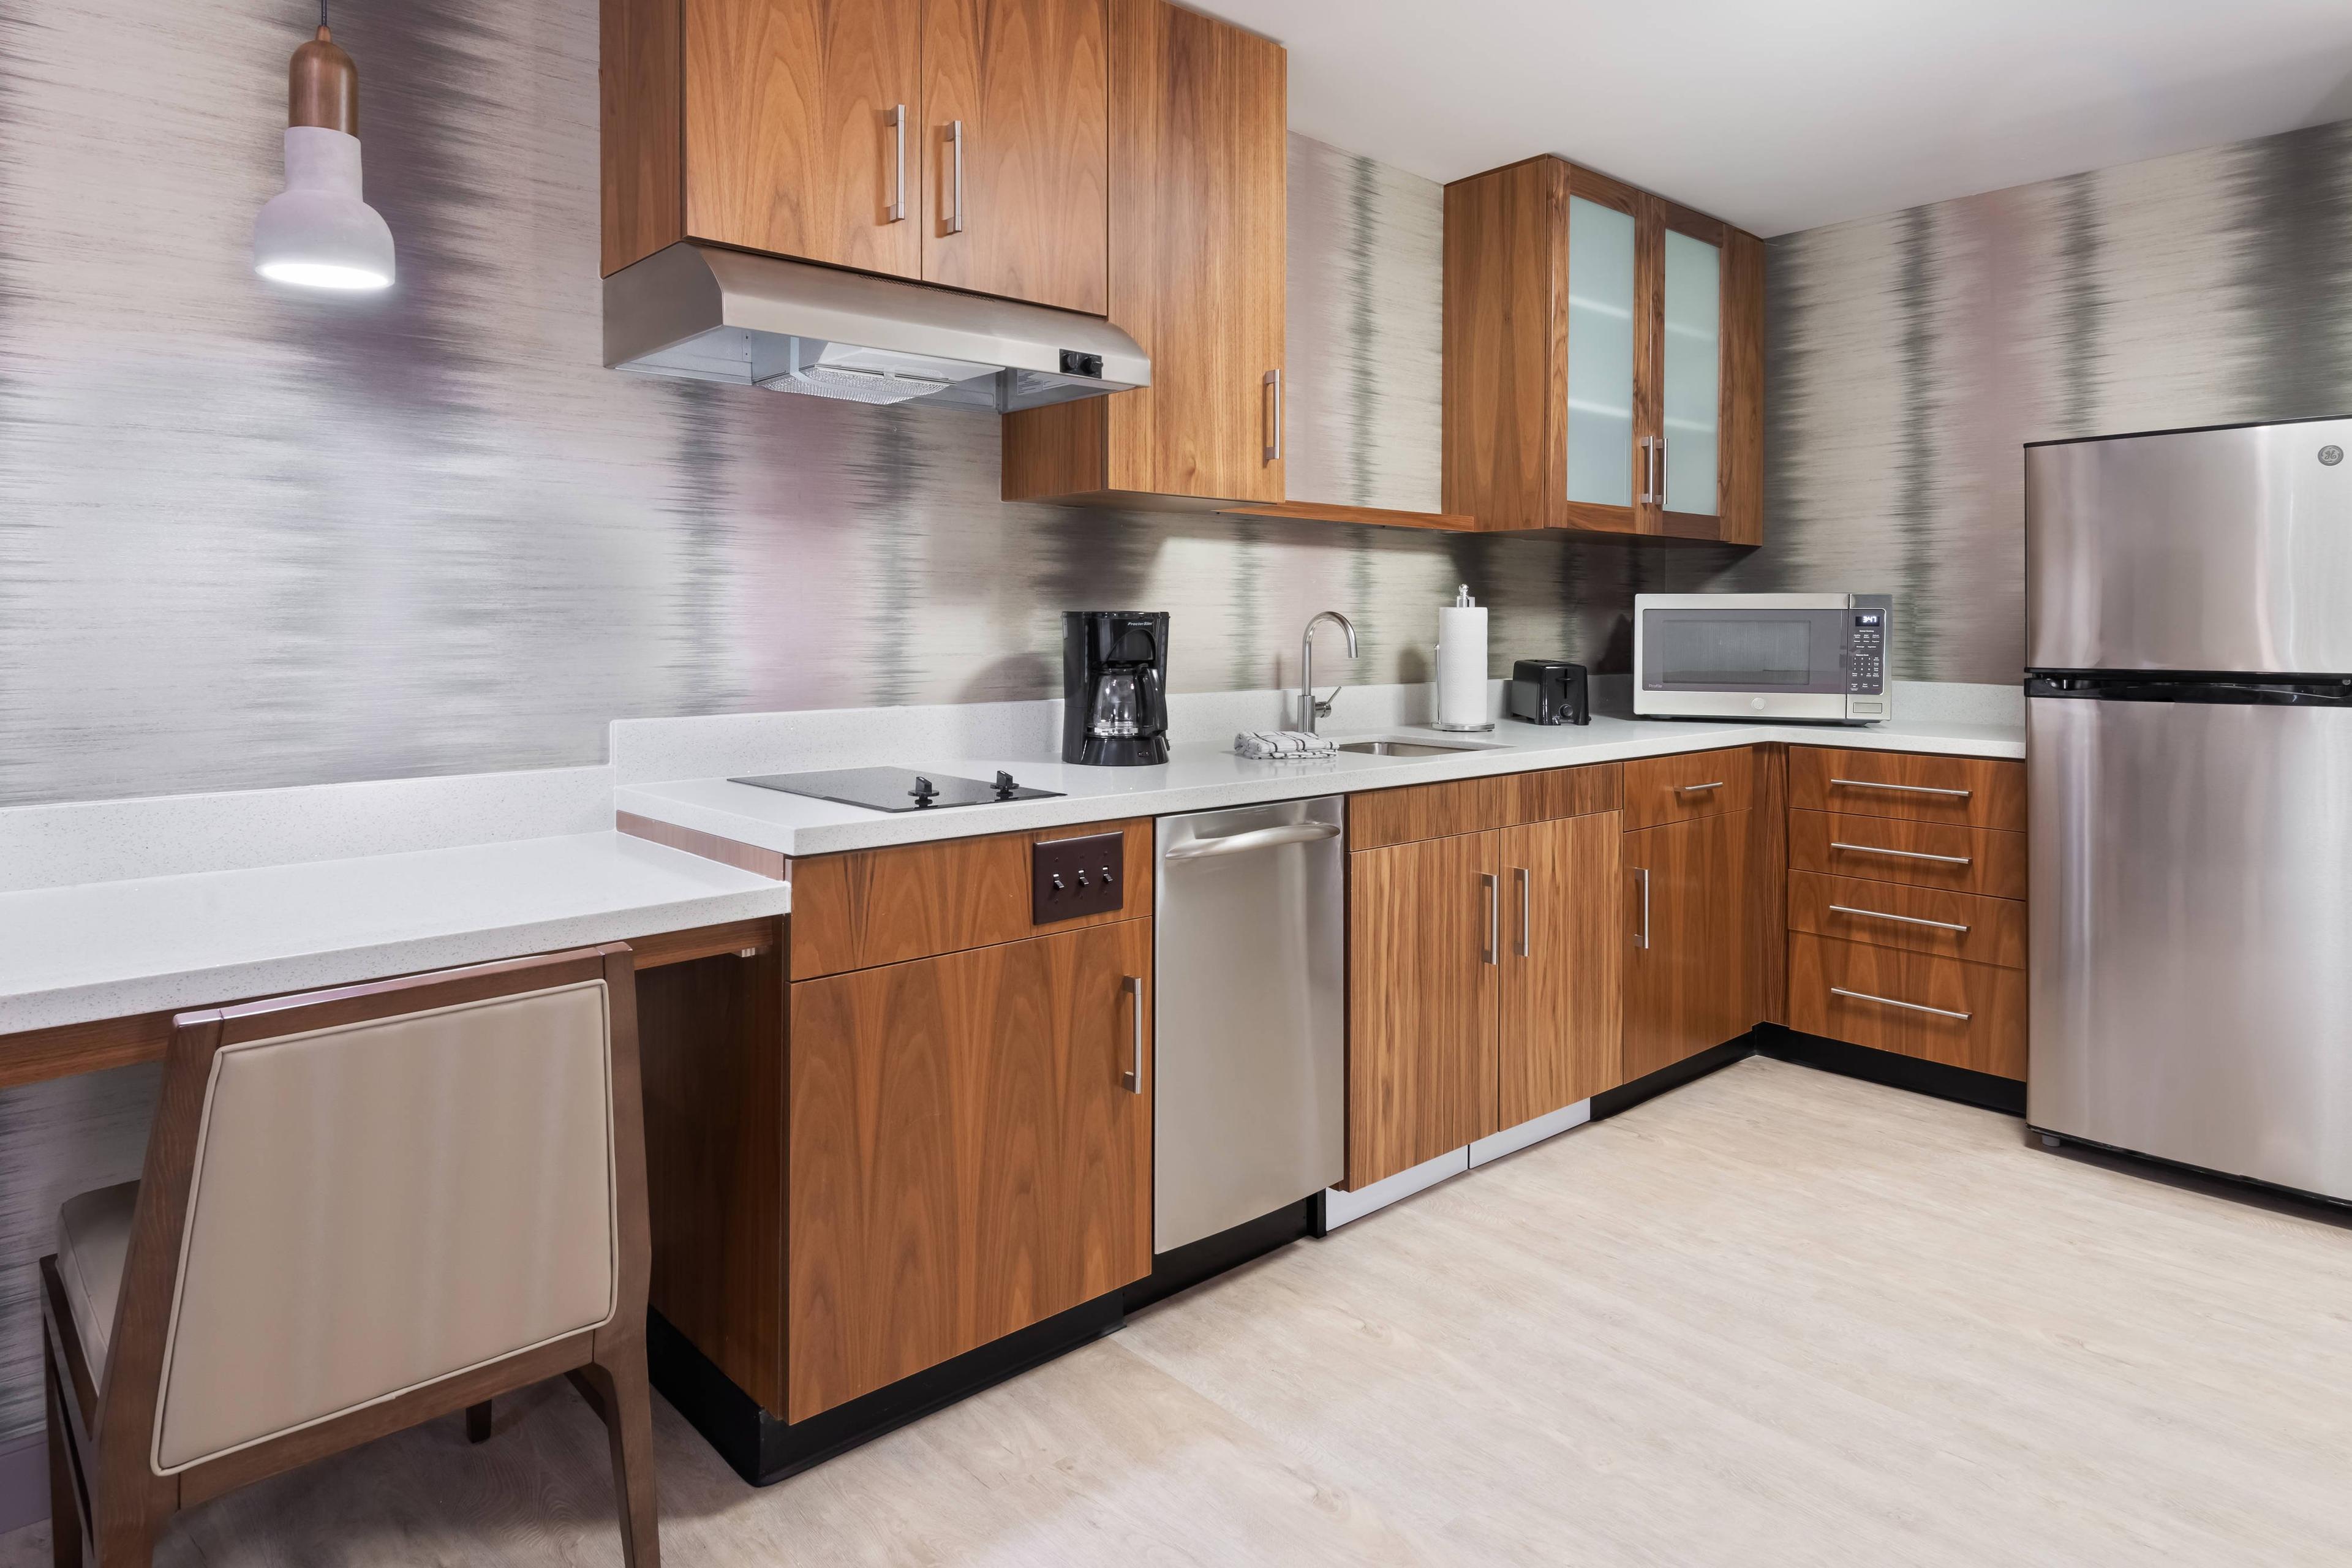 The kitchens in our accessible rooms were designed with our guests in mind. Items, including the microwave and light switches, are lowered for easy access.